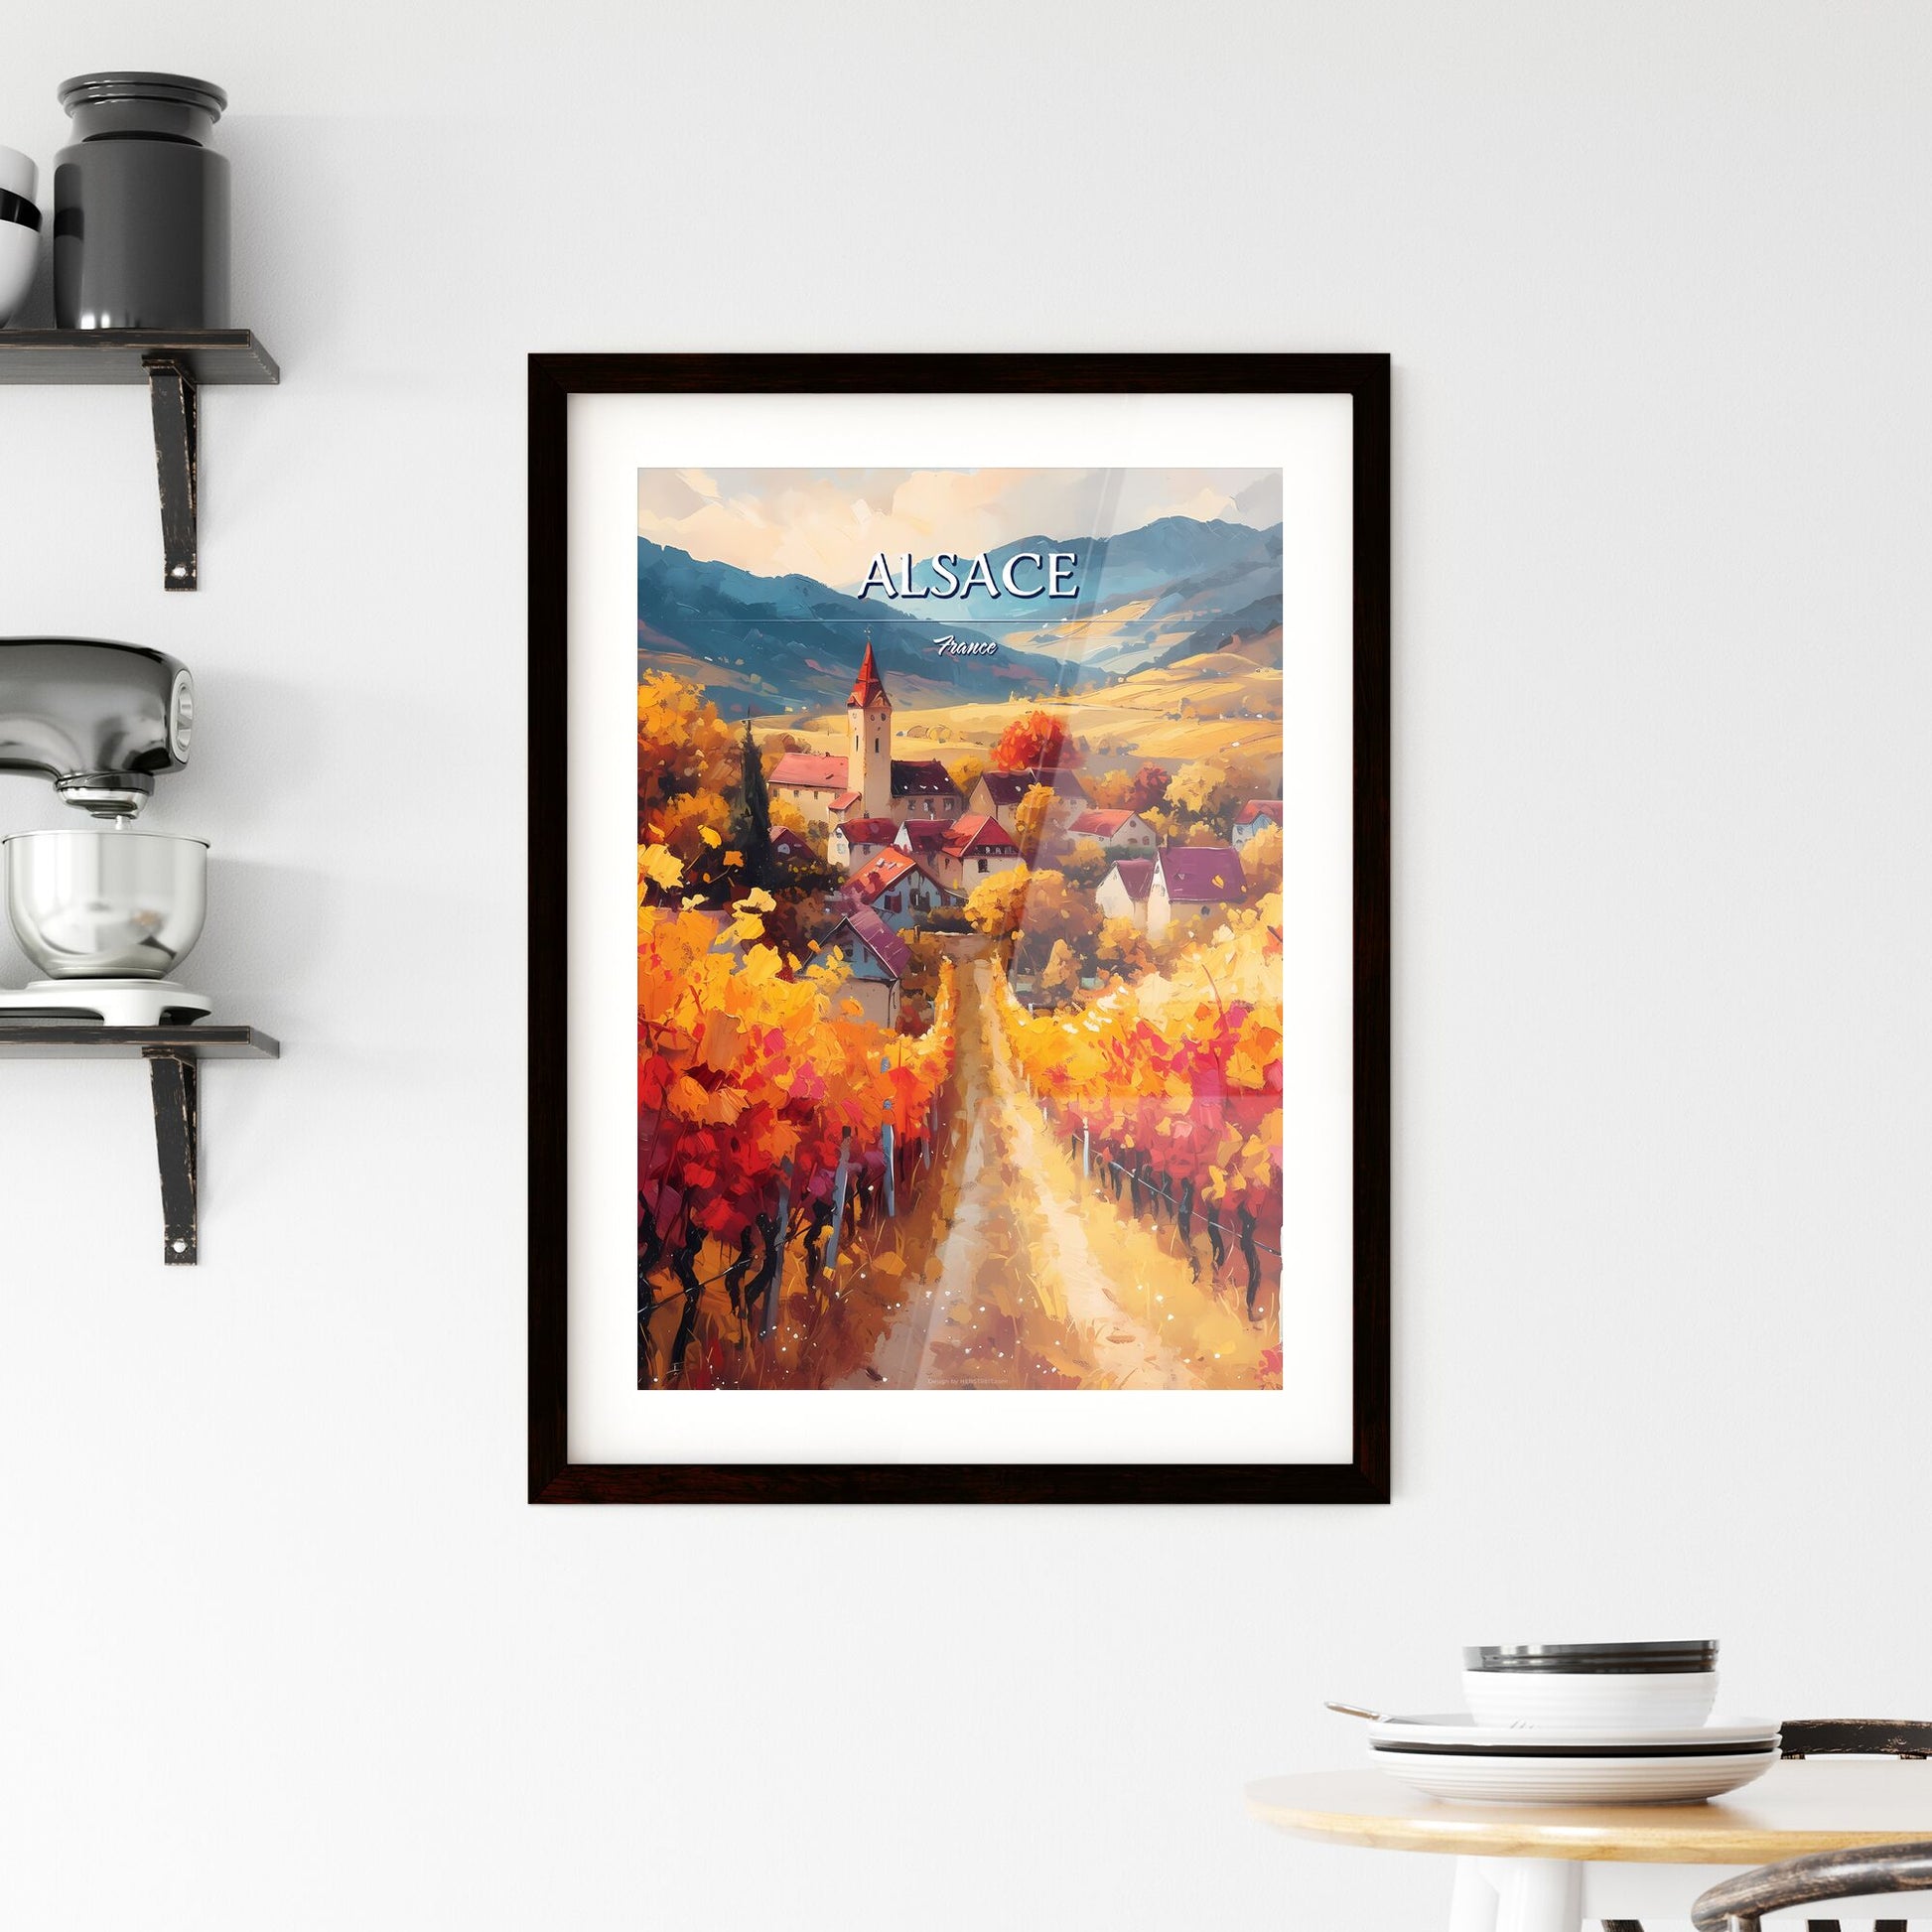 Alsace, France - Art print of a painting of a village in a vineyard Default Title